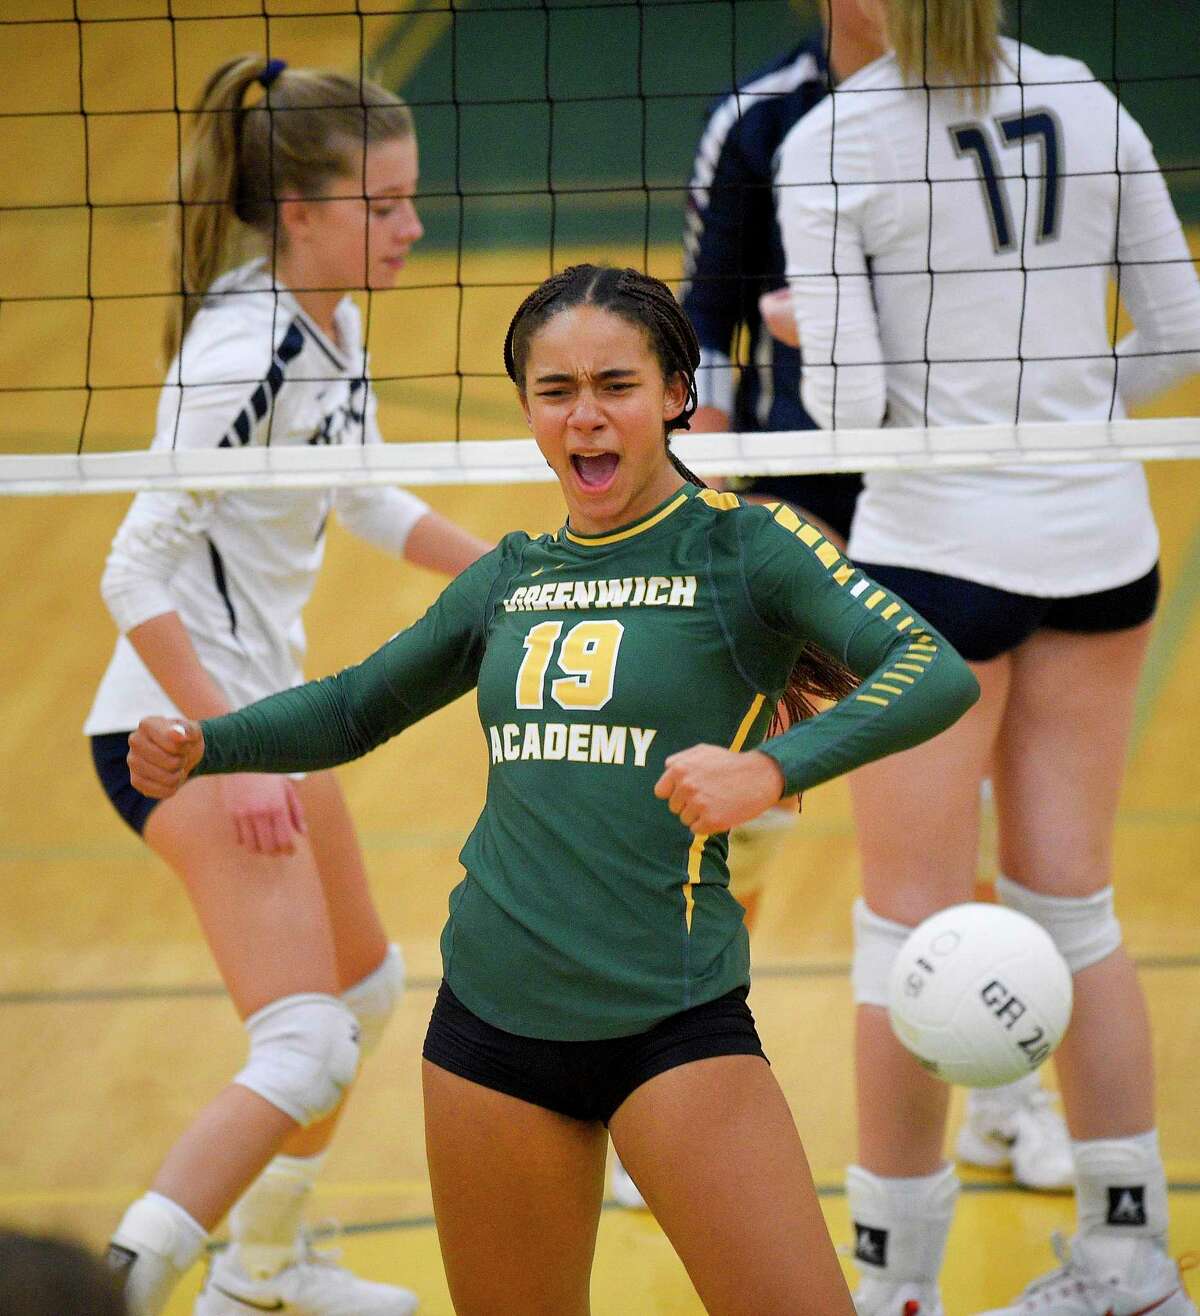 Greenwich Academy's Alexandra Trofort (19) celebrates a point in the first set against King in a FAA Volleyball semifinal match at Greenwich Academy on Nov. 6, 2019 in Greenwich, Connecticut.